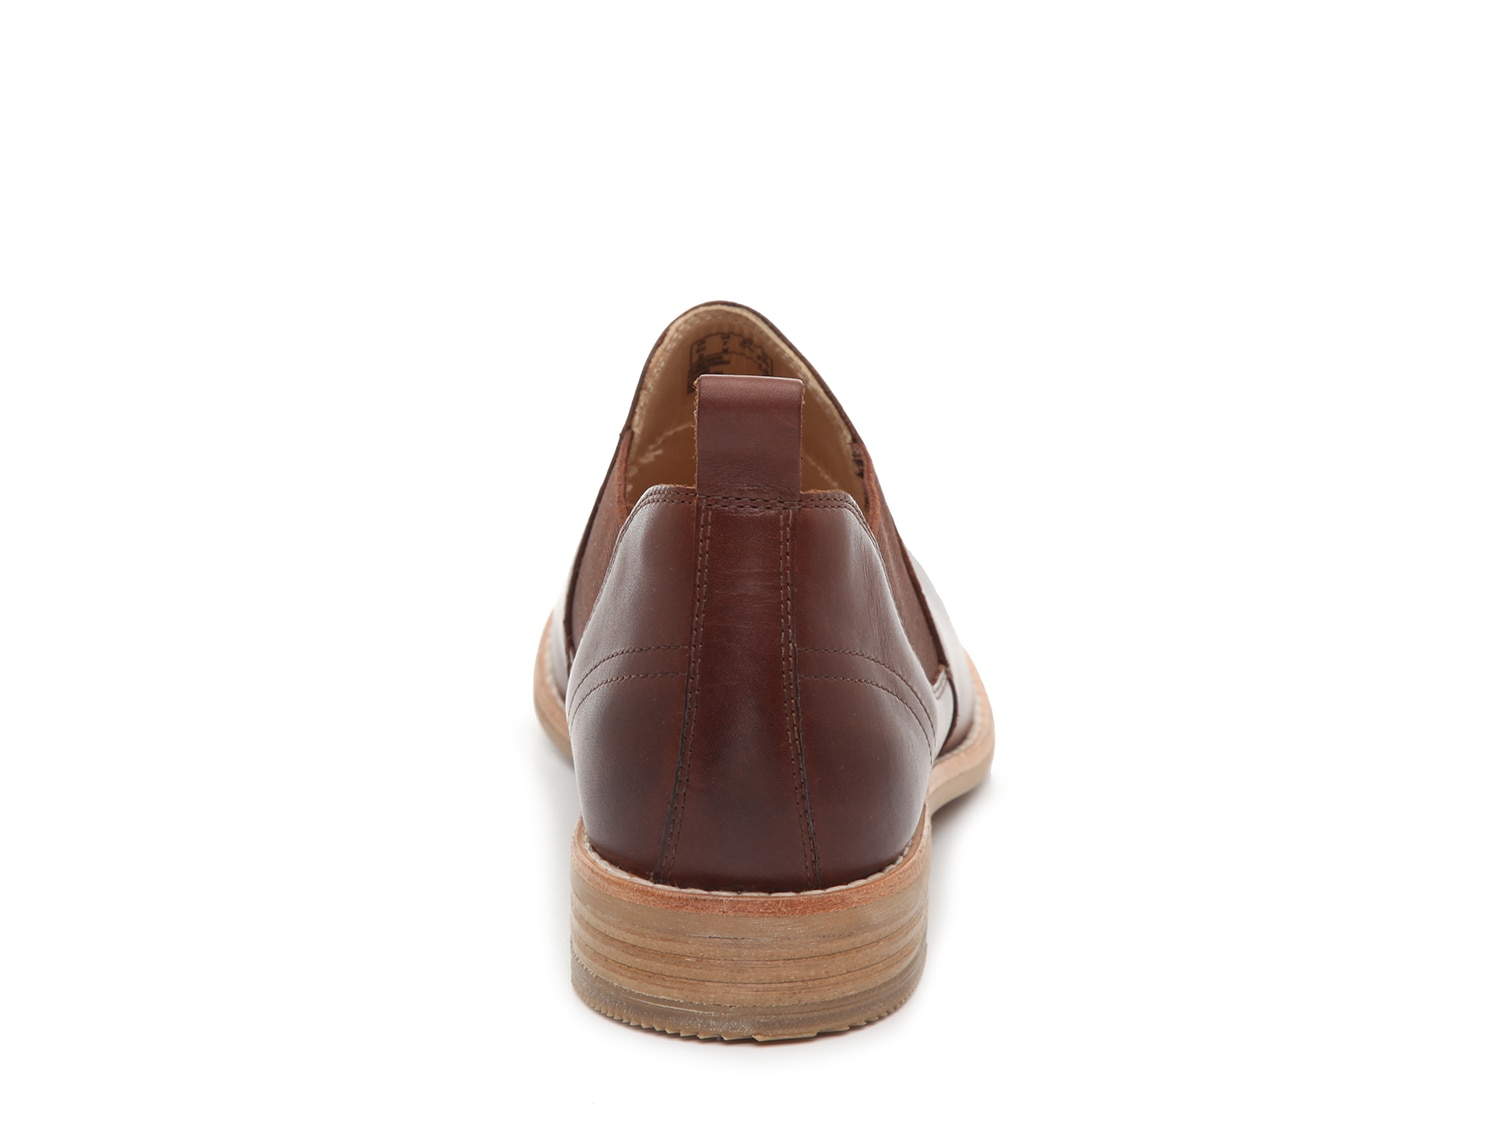 clarks artisan edenvale page chelsea boot